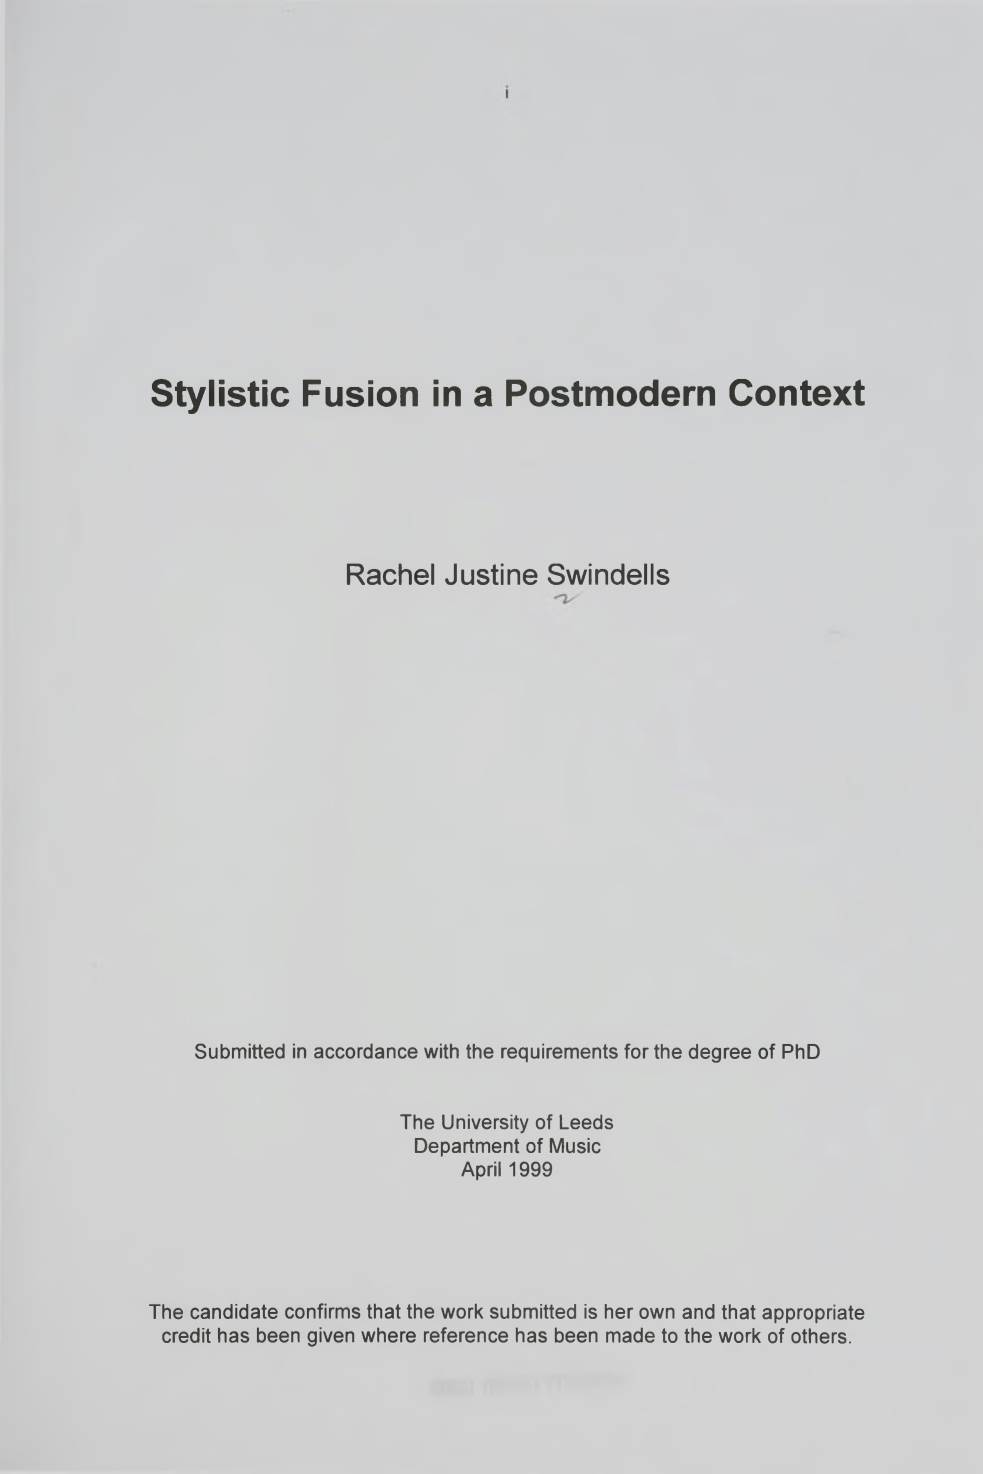 Stylistic Fusion in a Postmodern Context